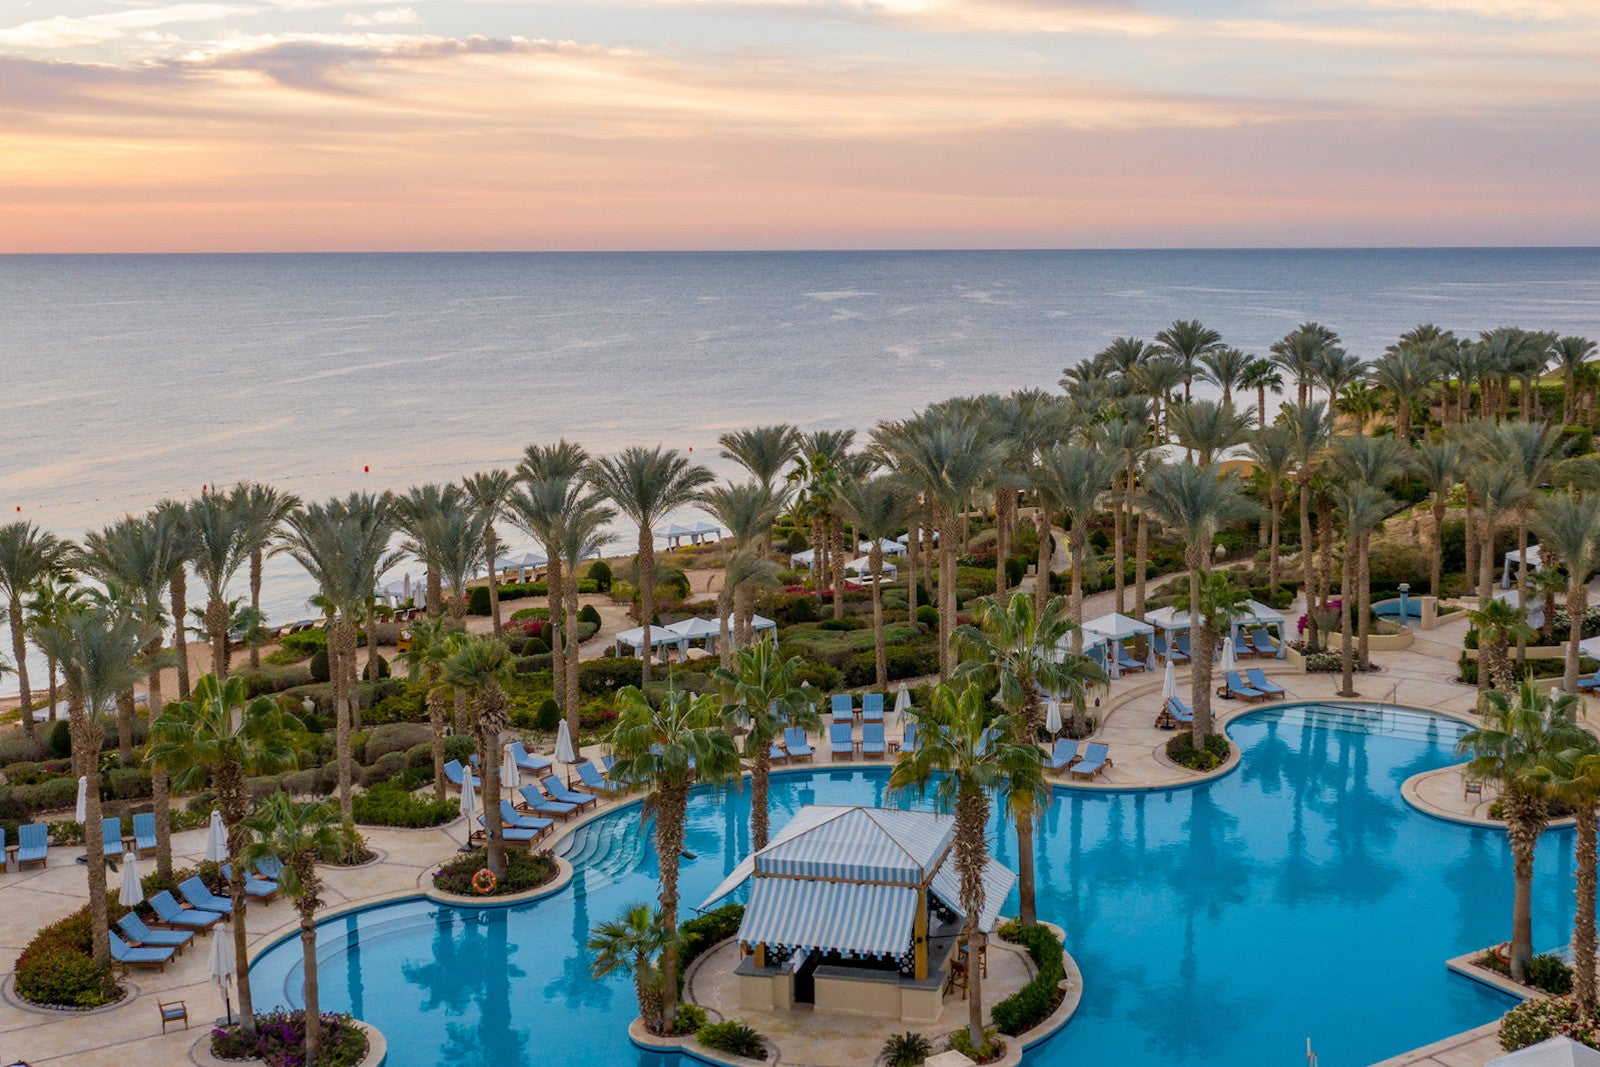 resort pool surrounded by palm trees and overlooking the Red Sea